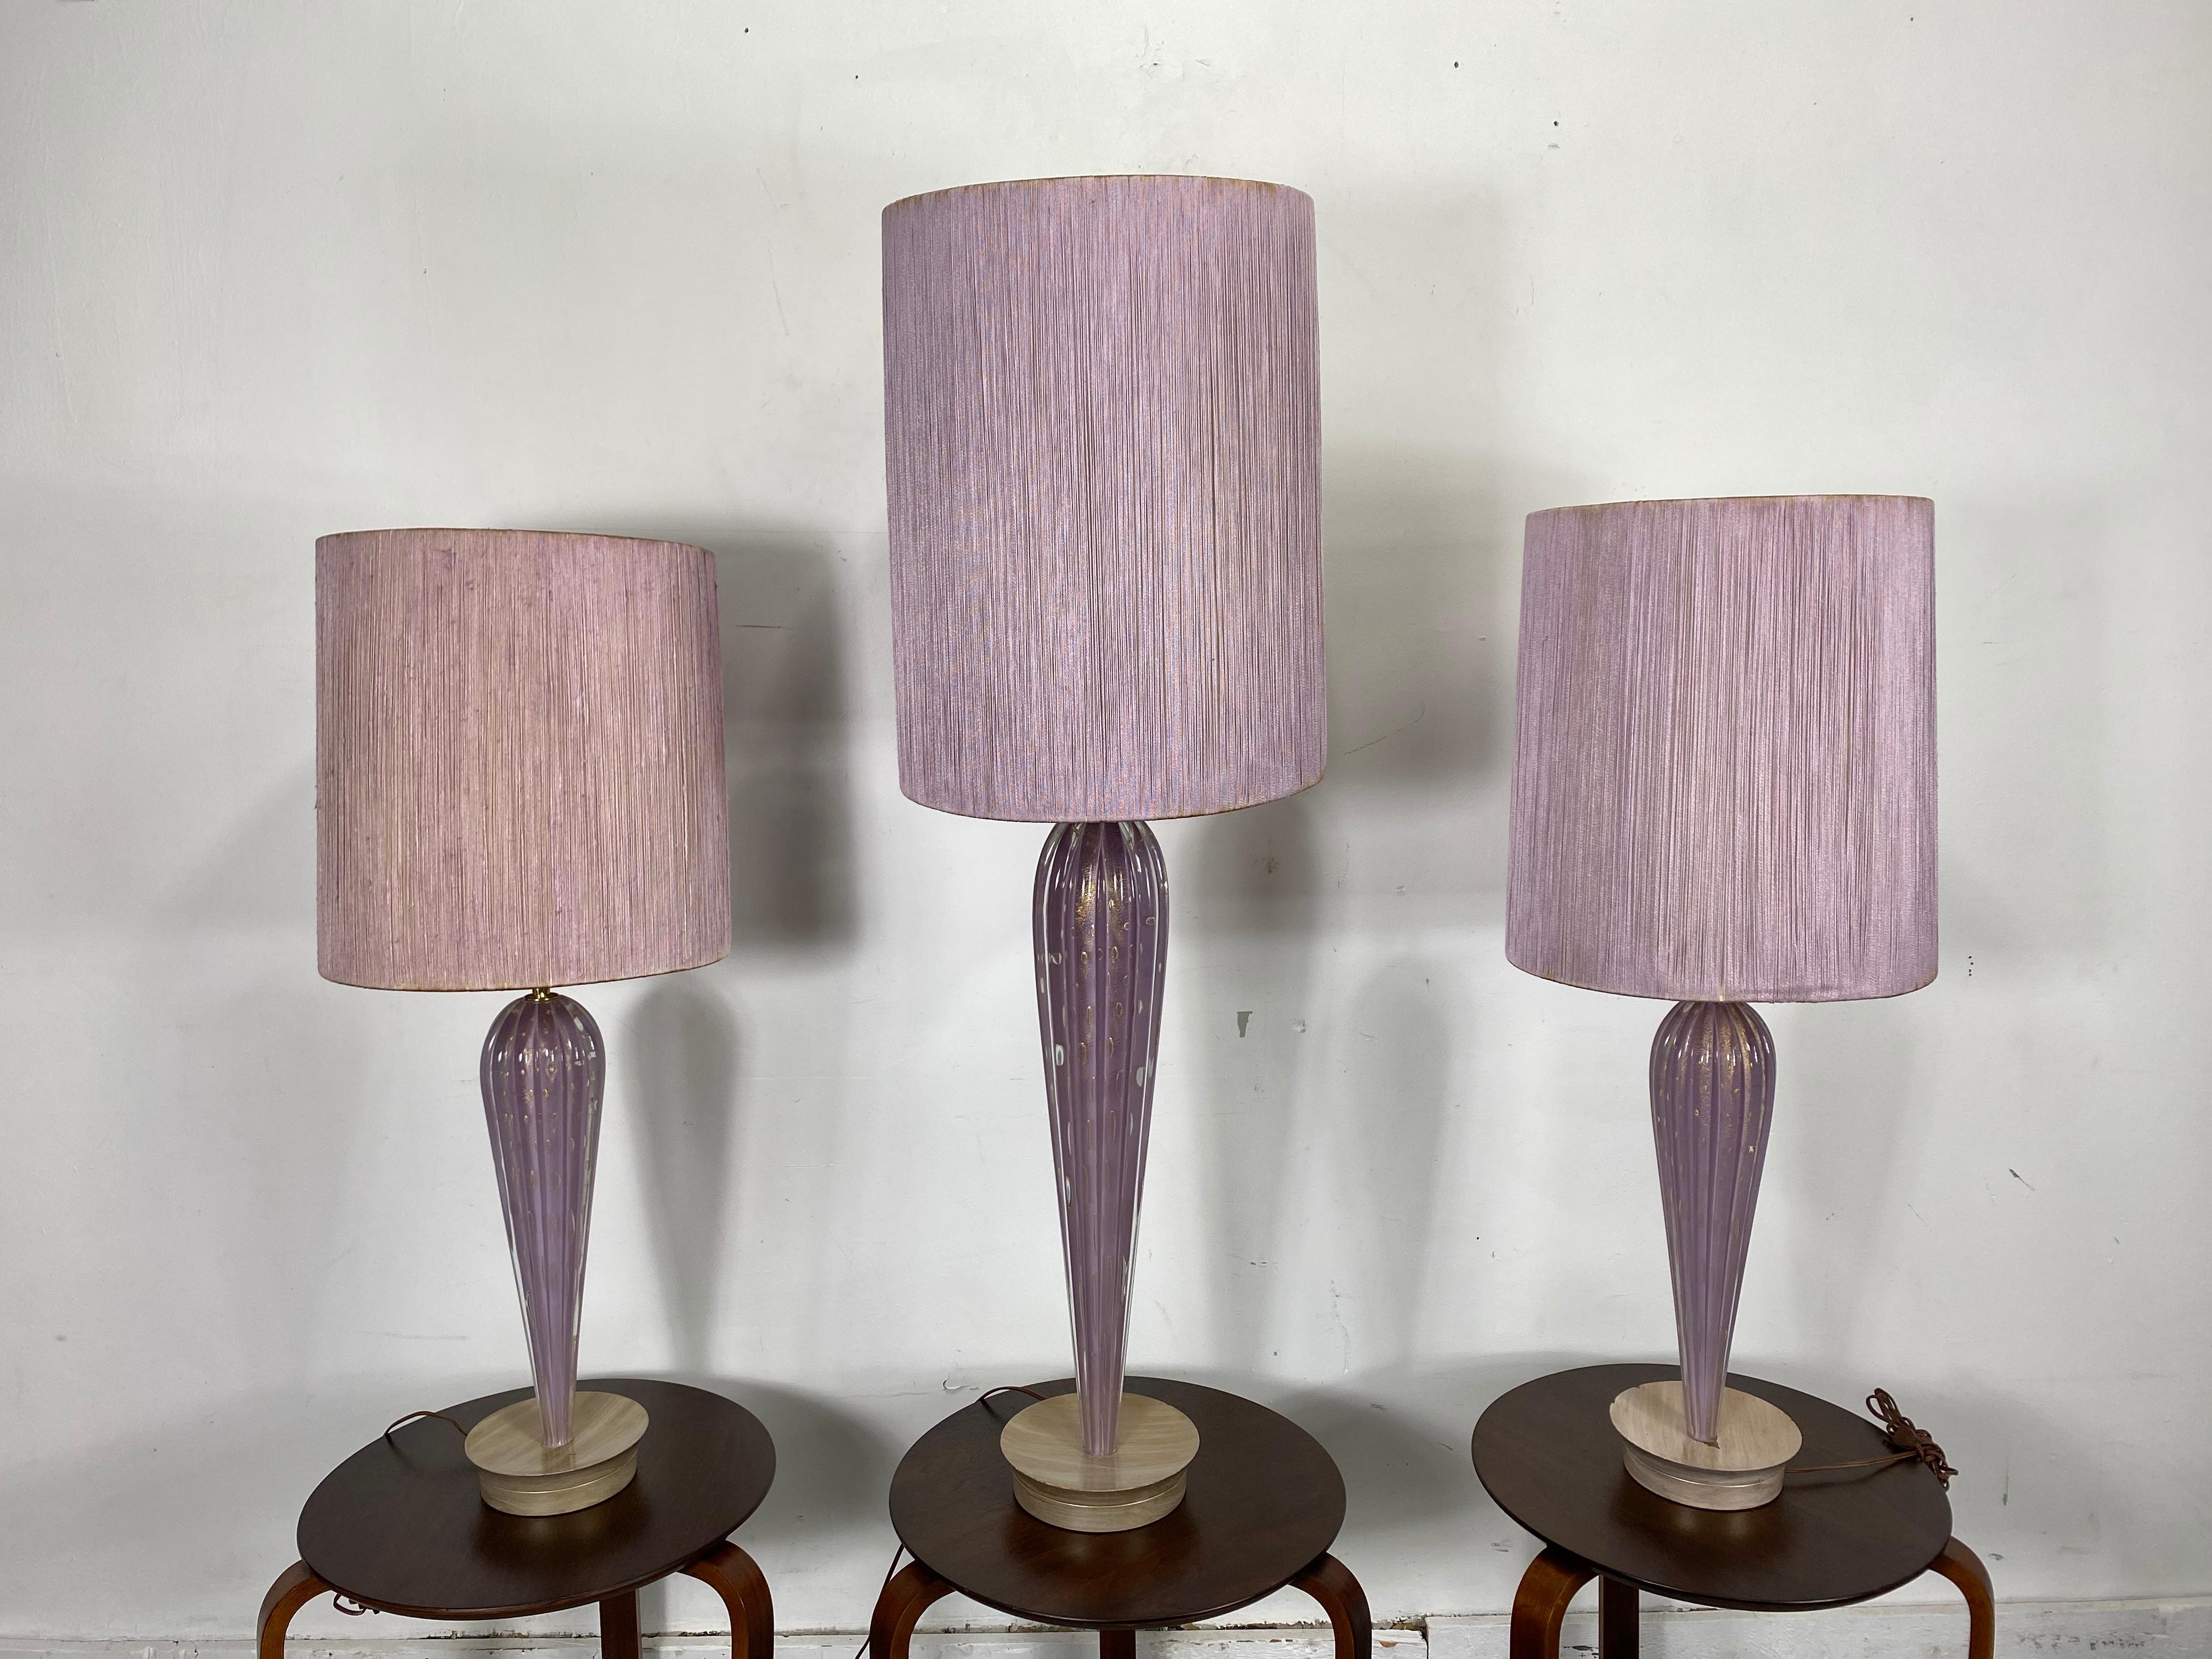 Hand-Crafted Stunning Set 3 Modernist Murano Lamps, by Seguso, Lavender, Original Shades